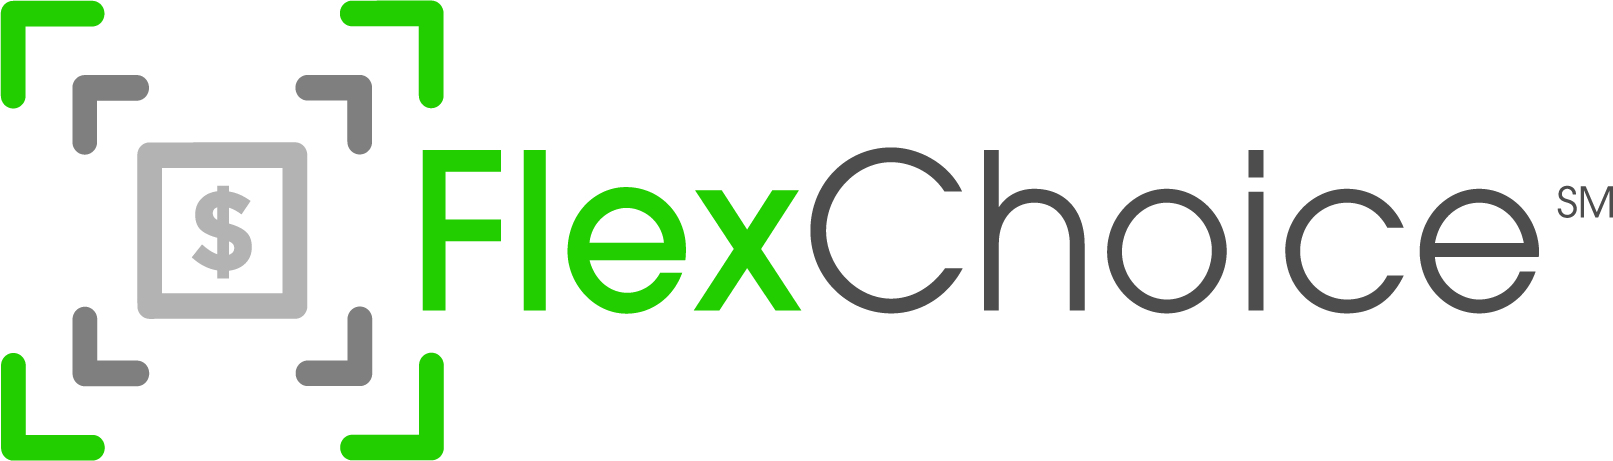 FlexChoice®, by Discovery Senior Living